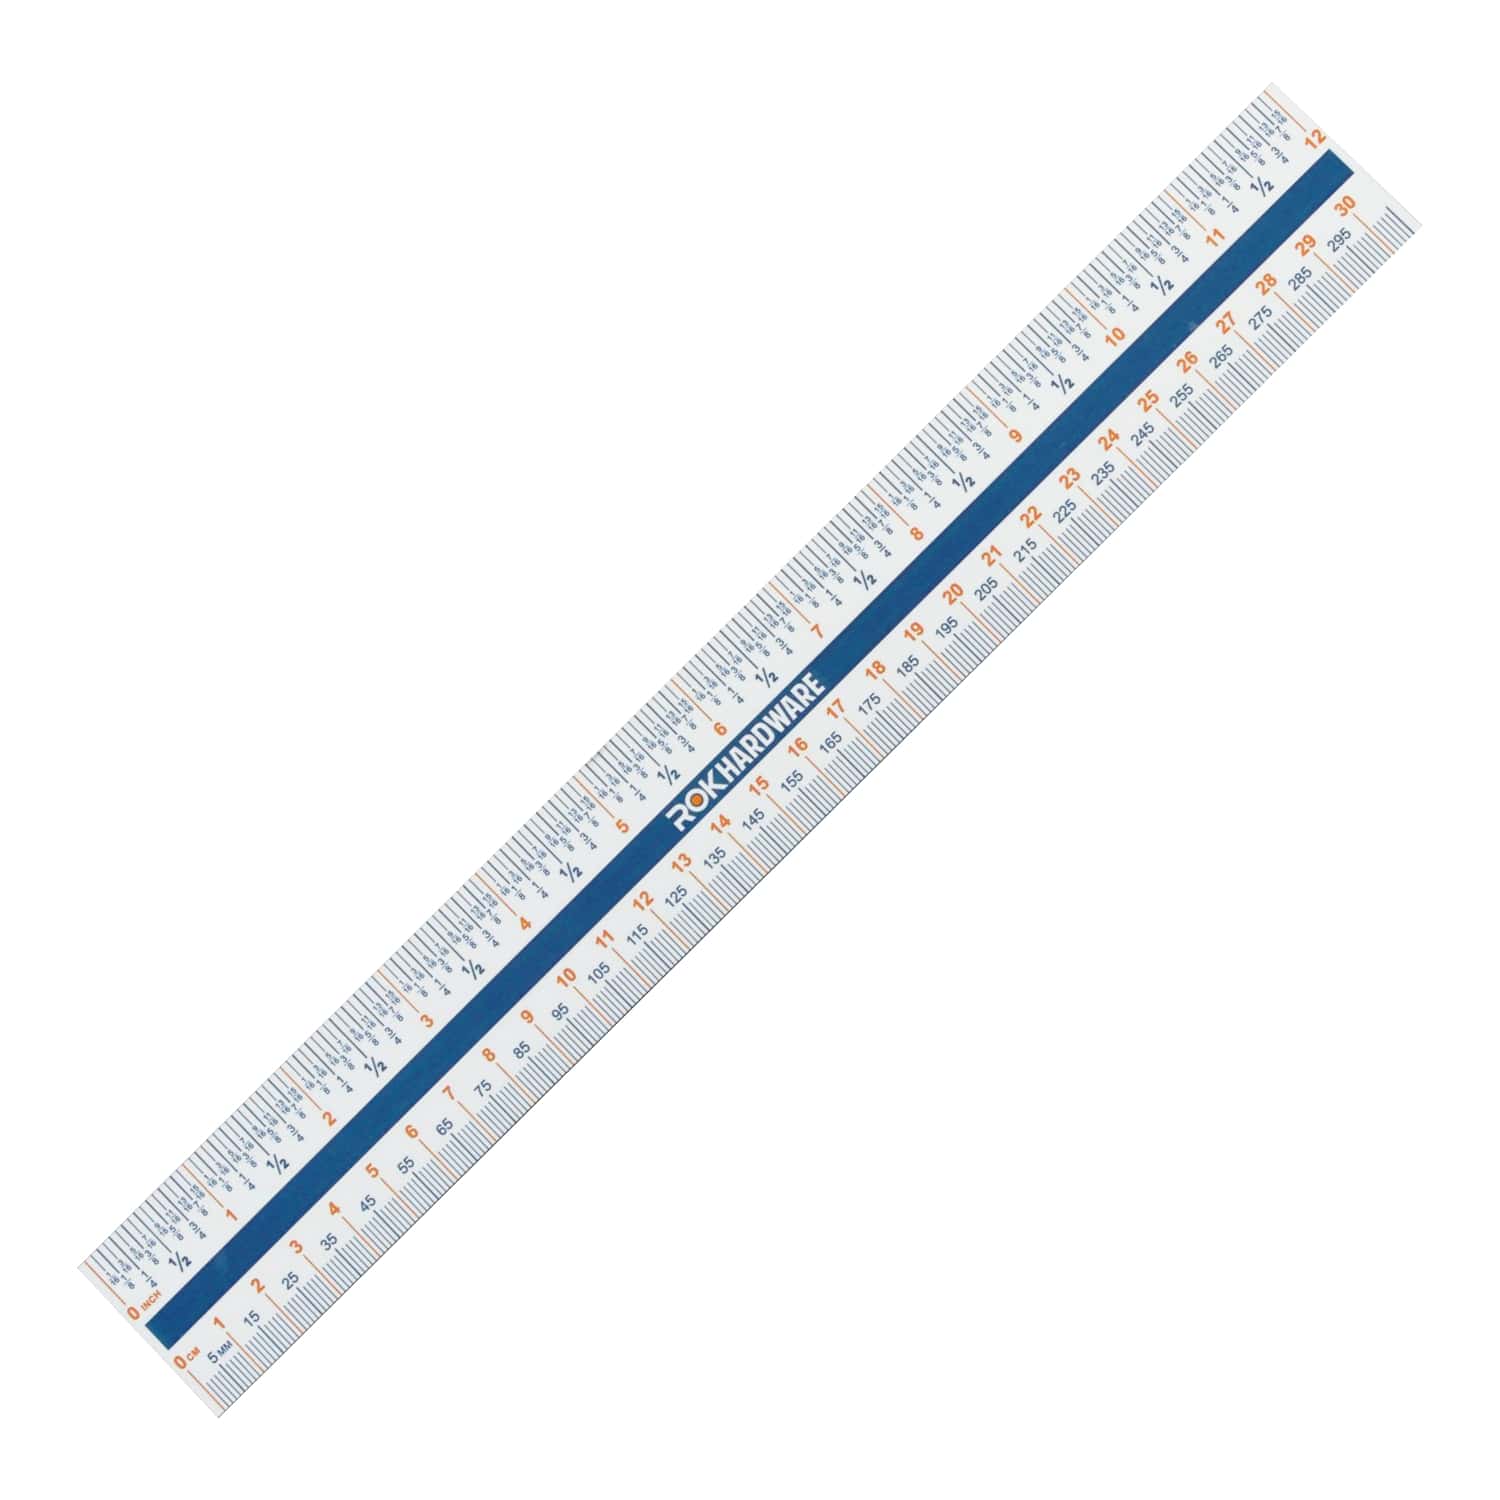 Stainless Steel Center Finding Ruler. Ideal for Woodworking, Metal Work,  Construction and Around The Home (12 Ruler) - Construction Rulers 